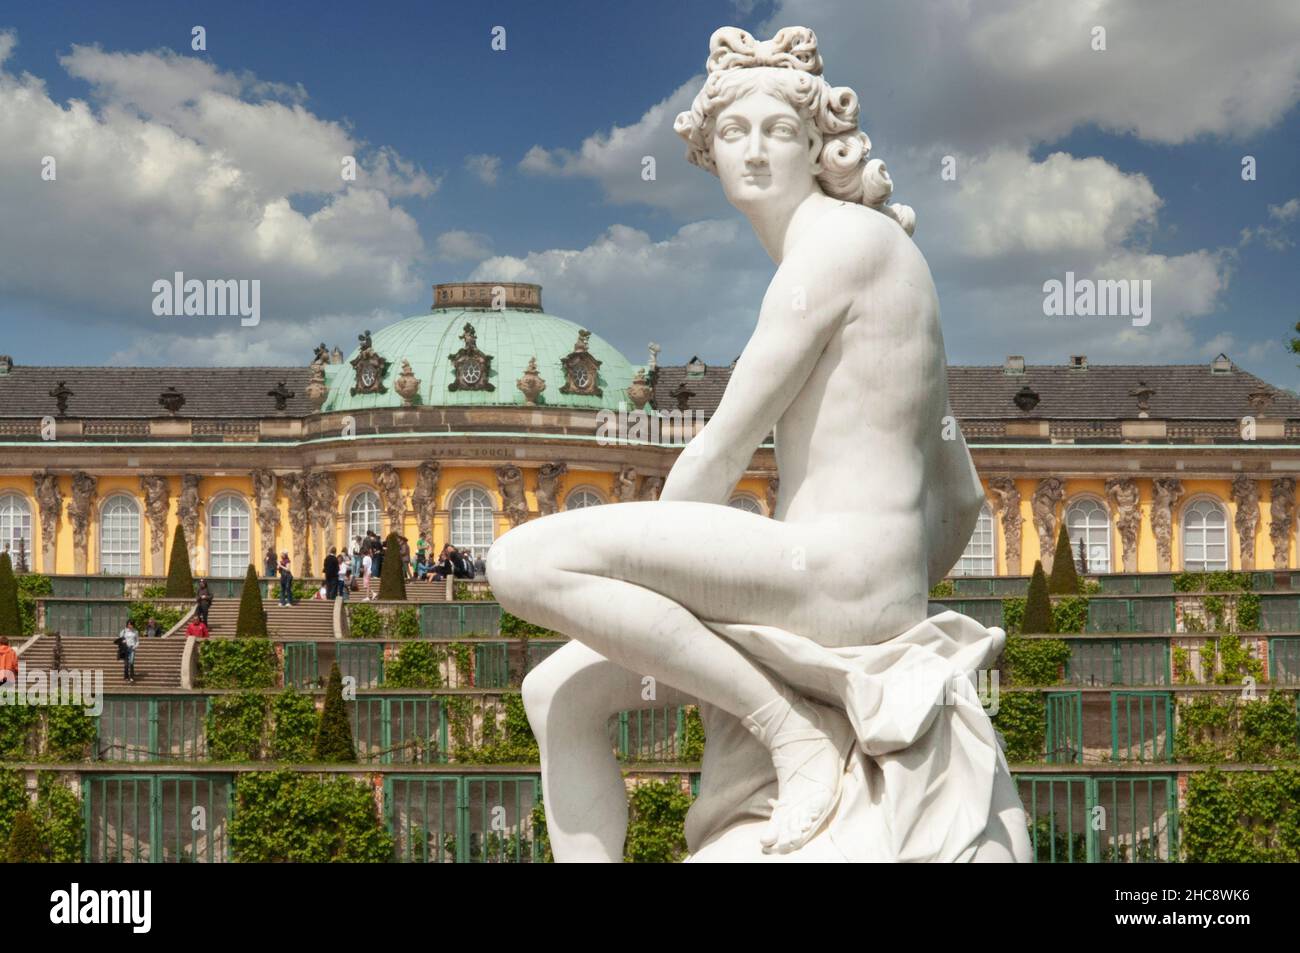 Classical statue at Park of Sanssouci Palace in Potsdam, Germany Stock Photo